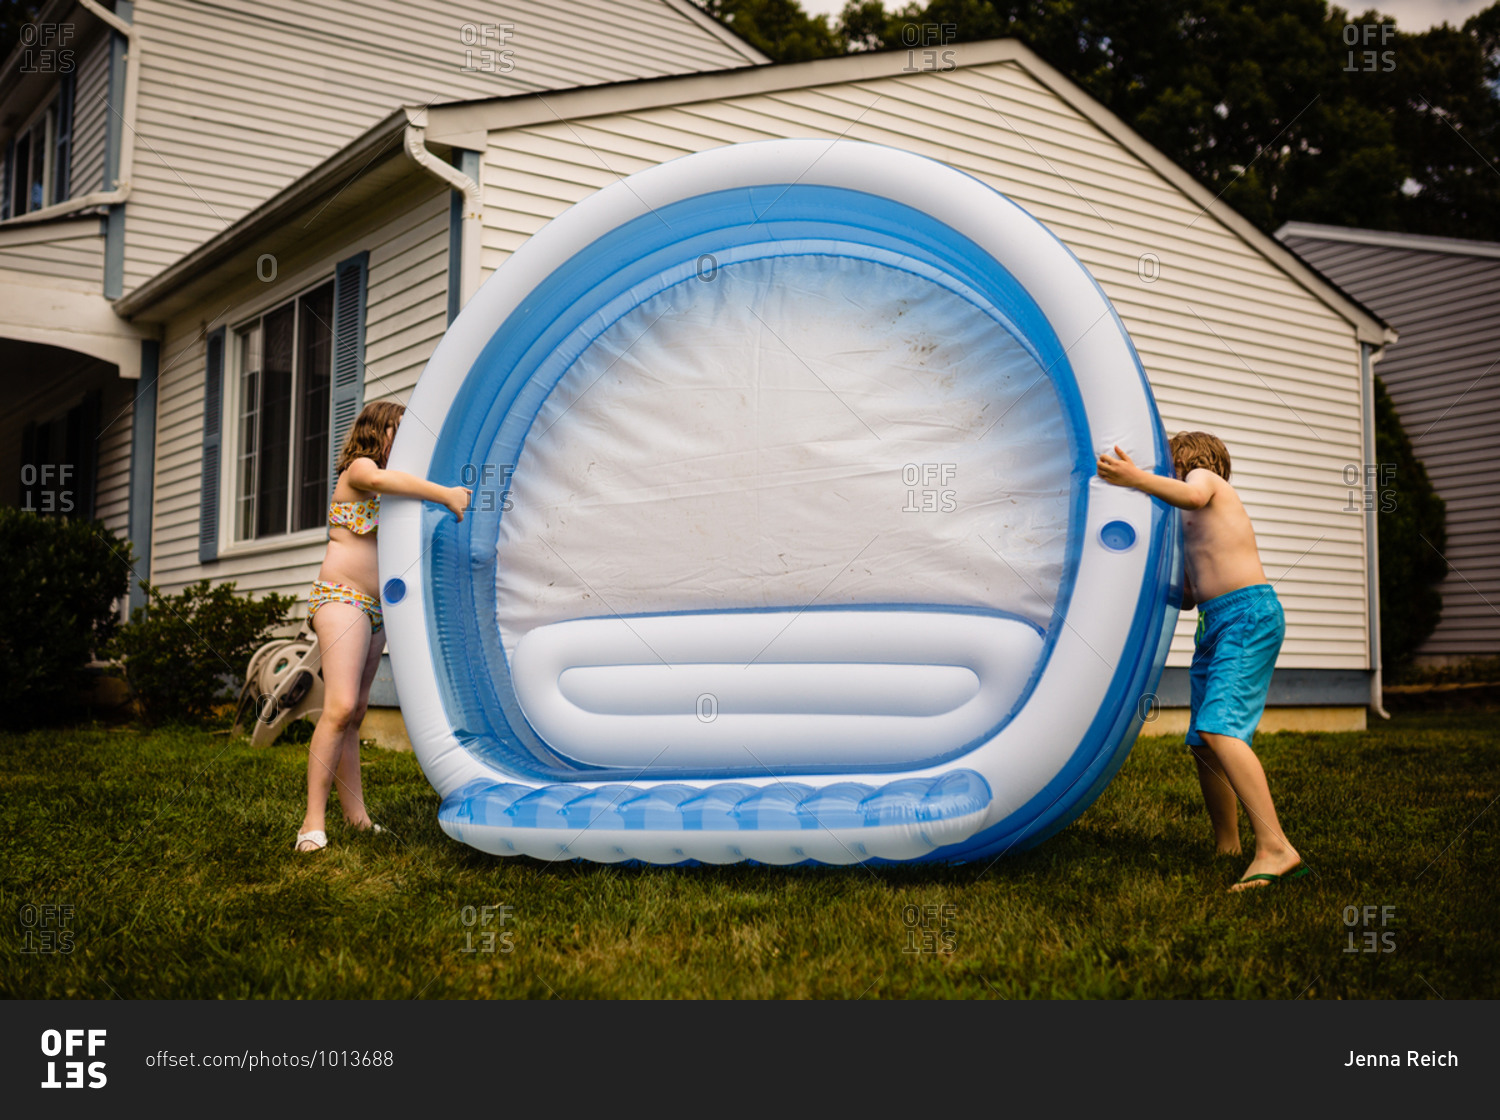 Two kids setting up an inflatable pool in their front yard